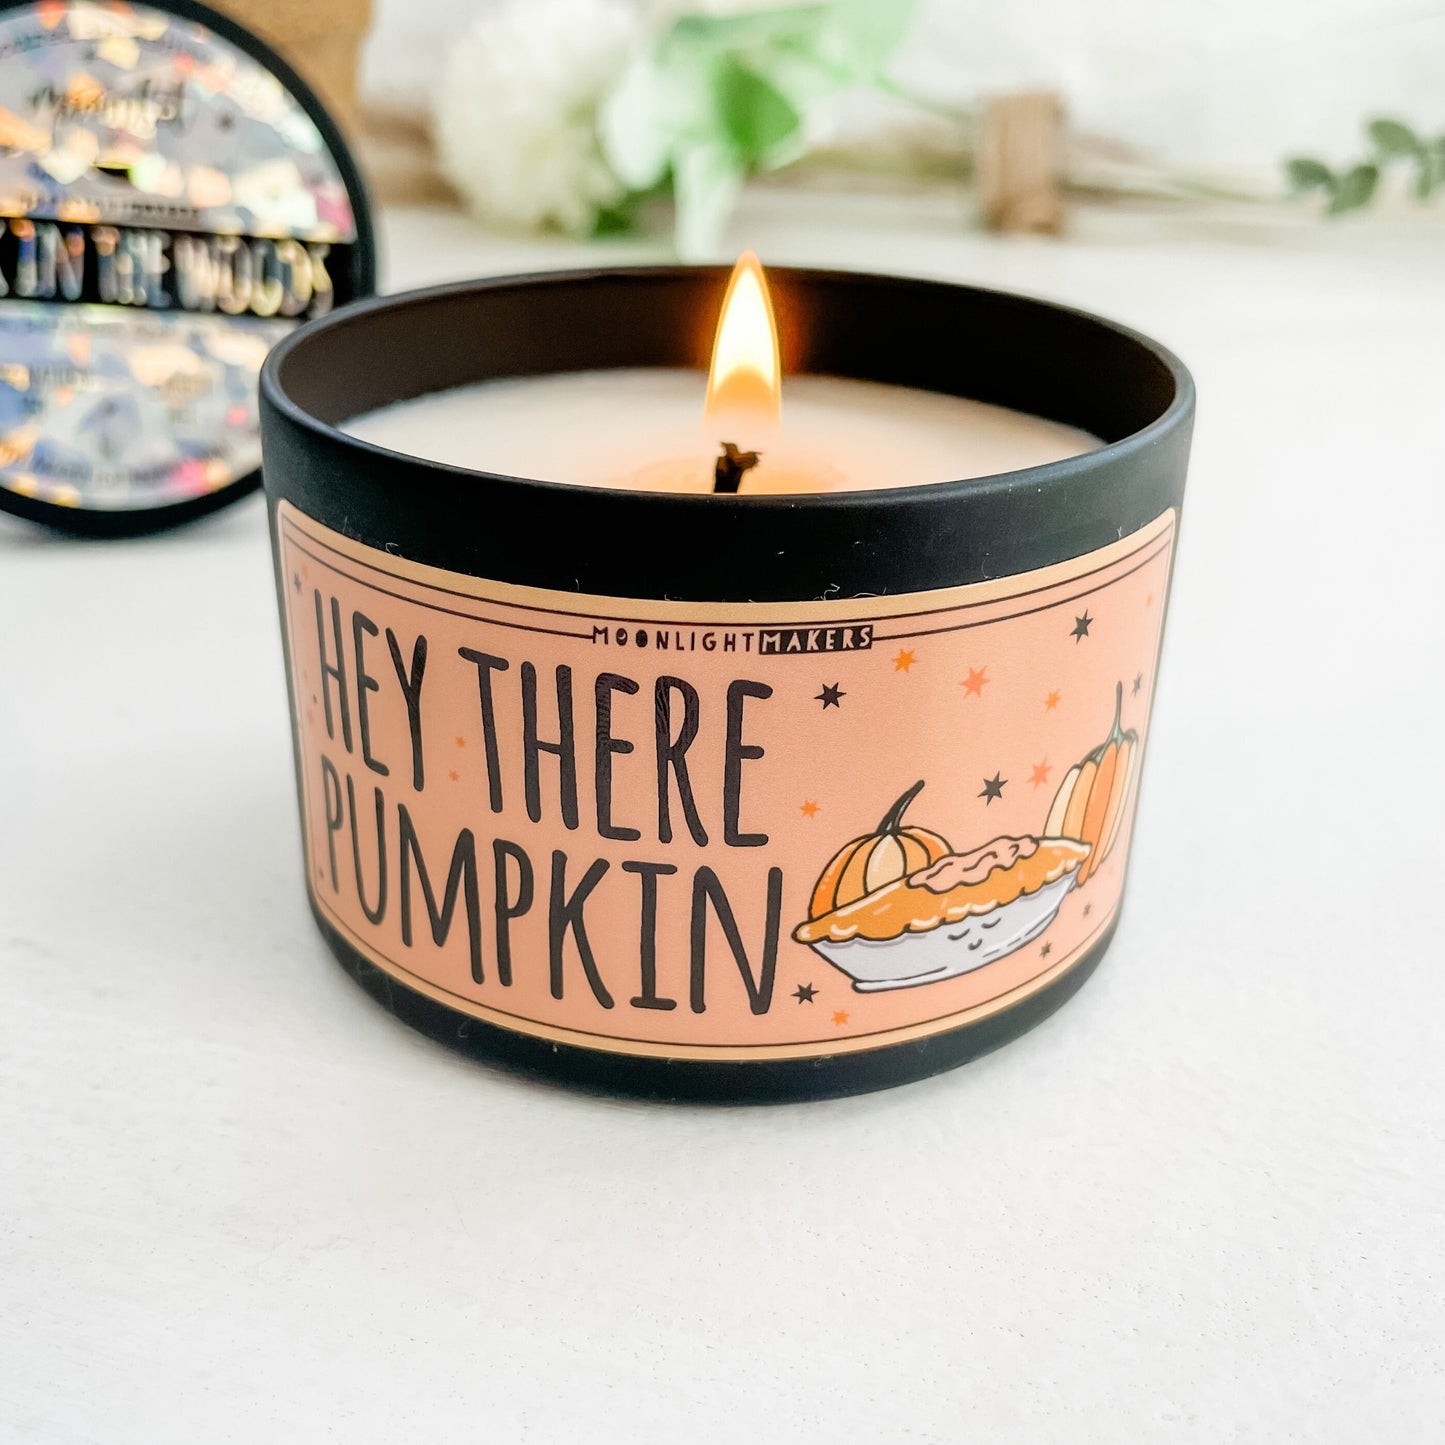 Hey There Pumpkin - 8oz Candle - Choose Your Scent - 100% Natural Soy Wax